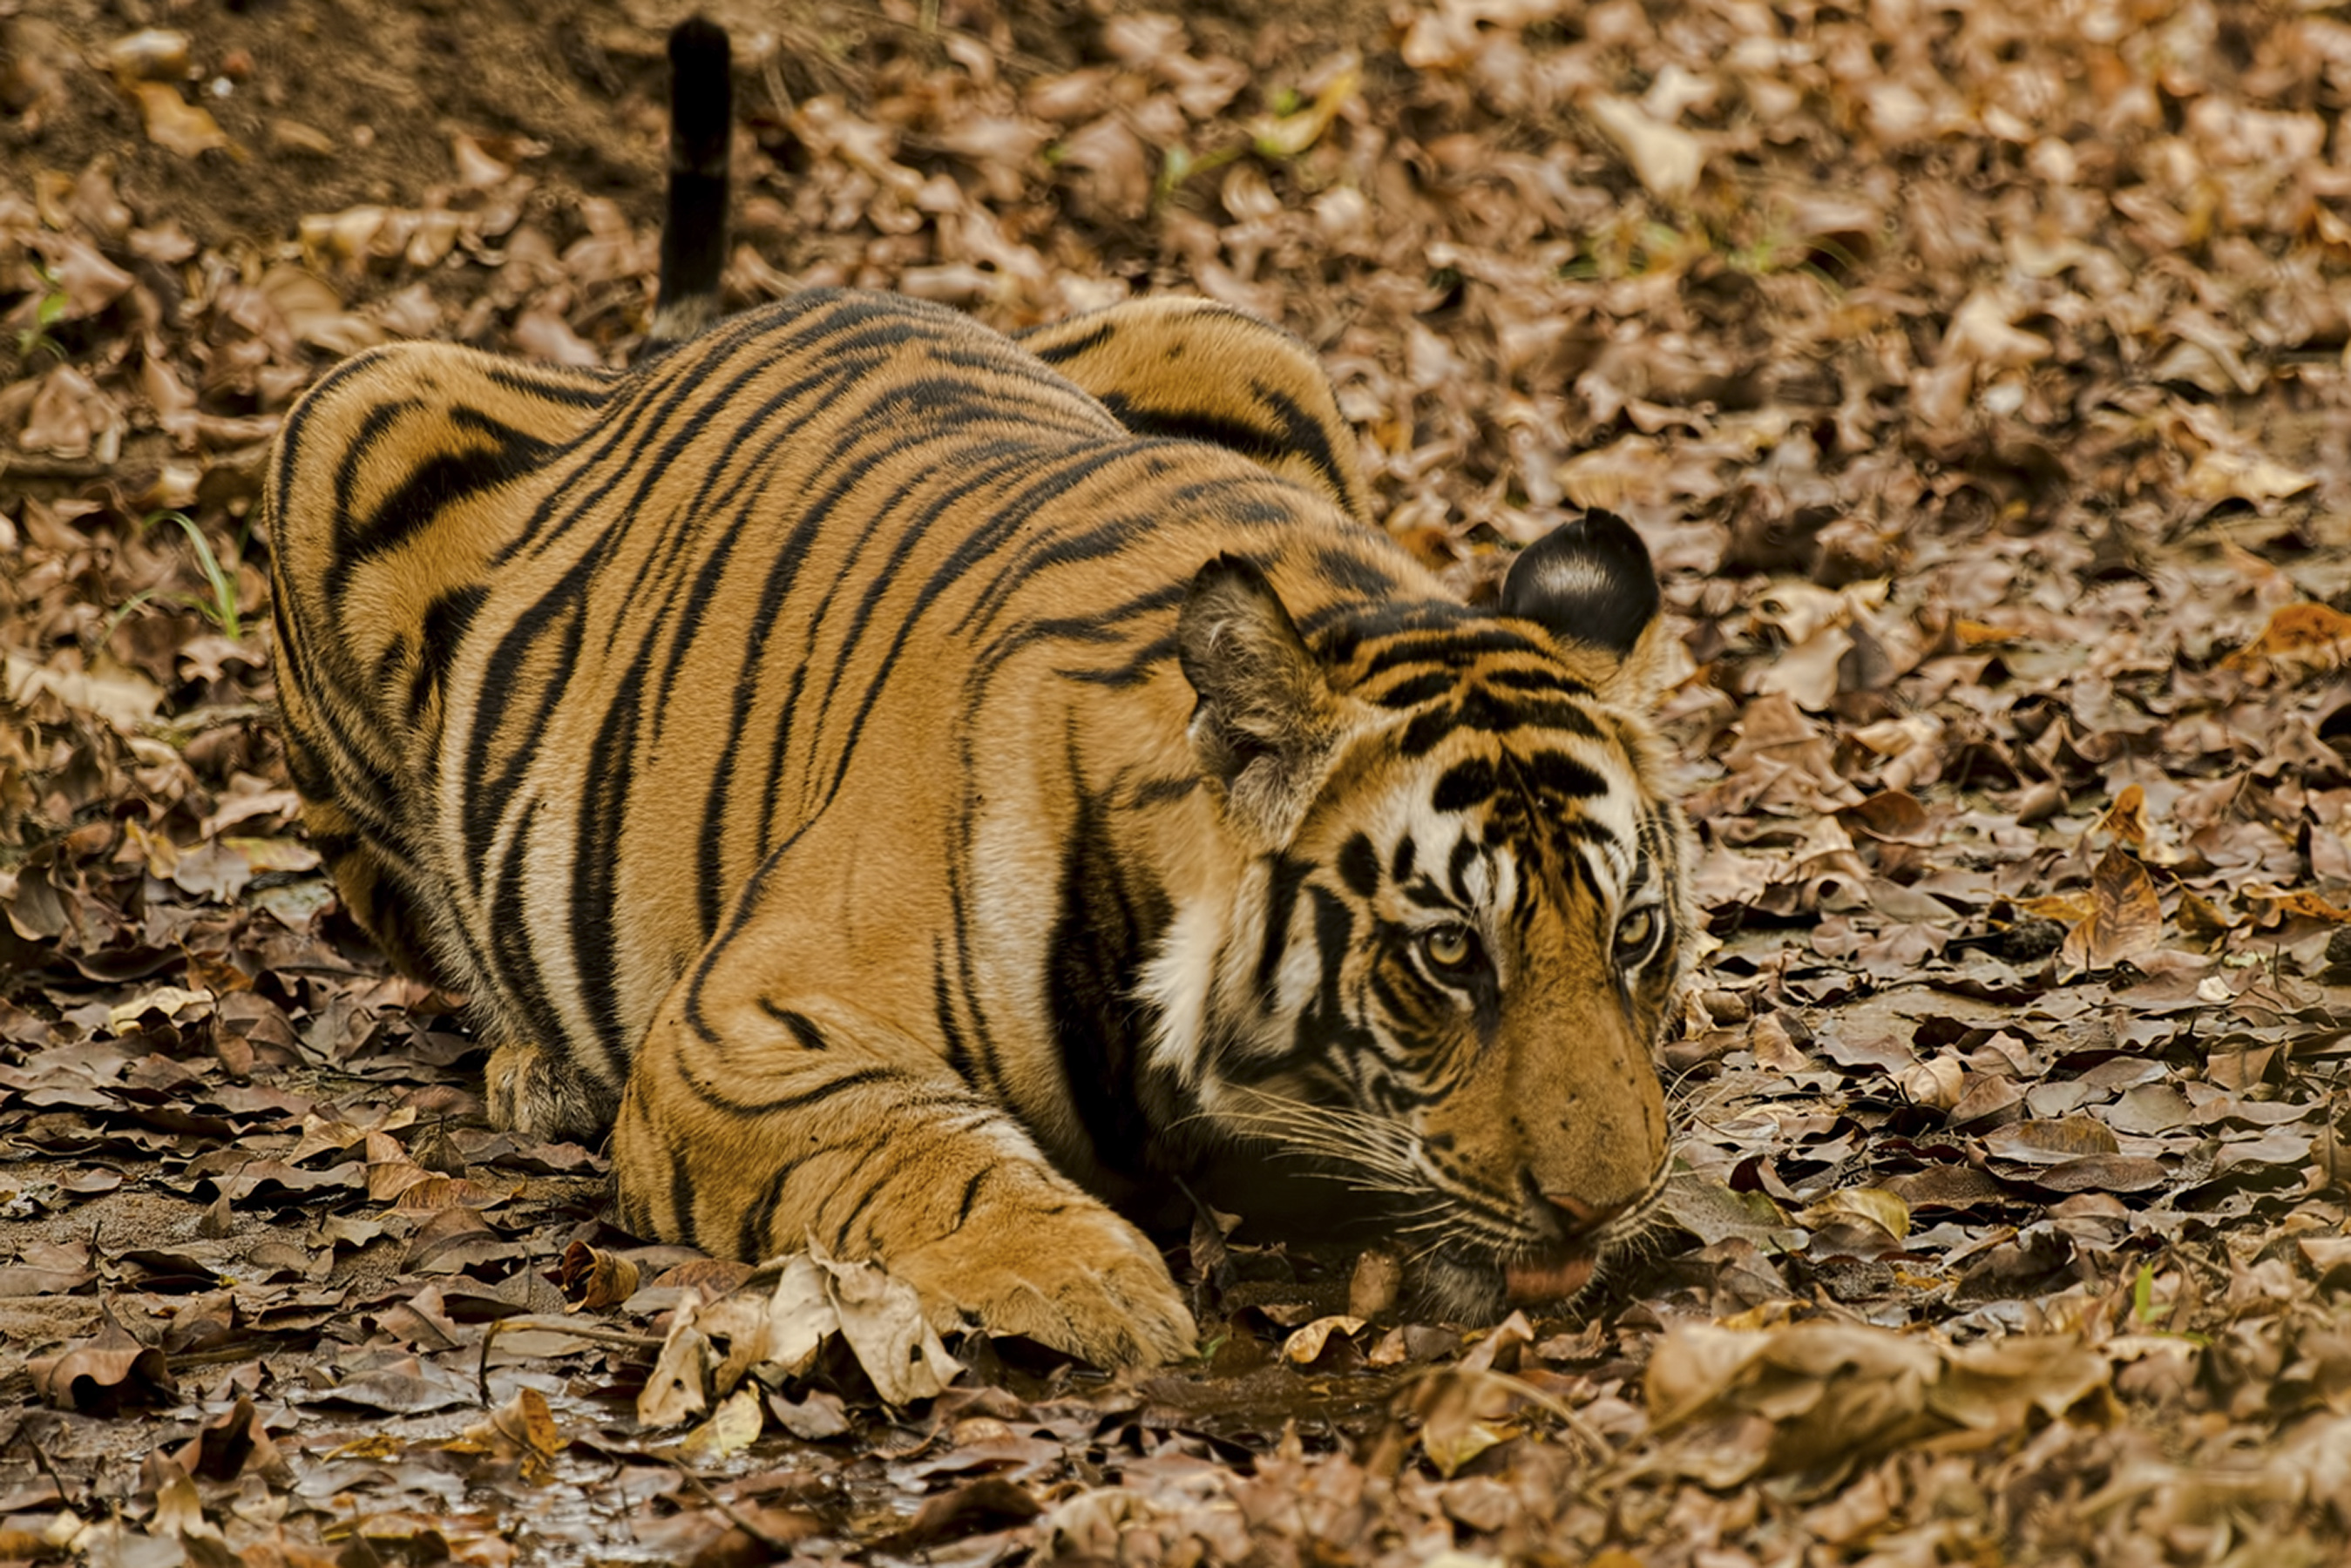 Tiger laying on ground